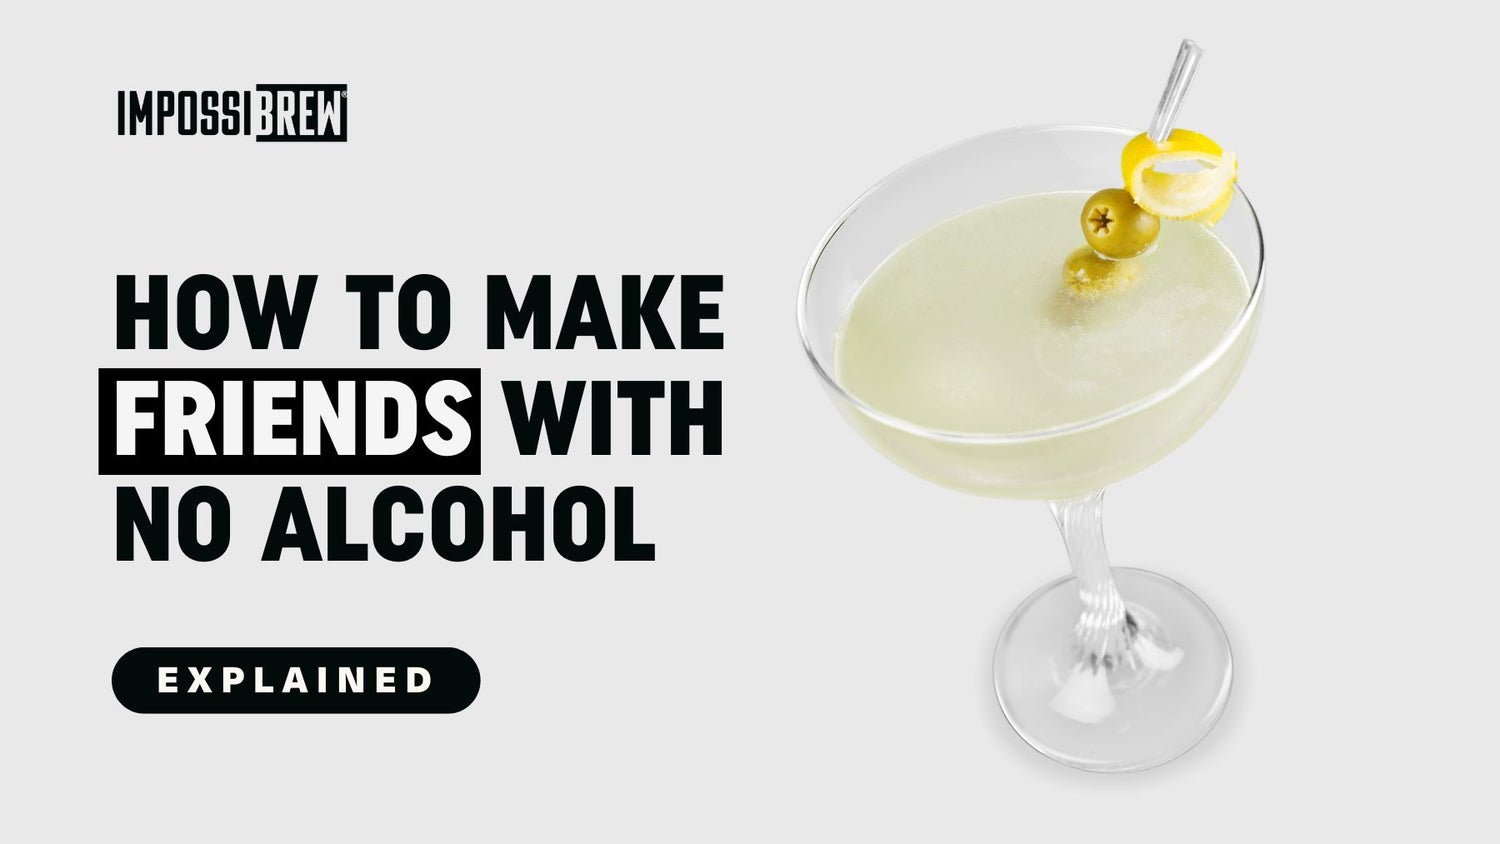 How to Make Friends Without Drinking